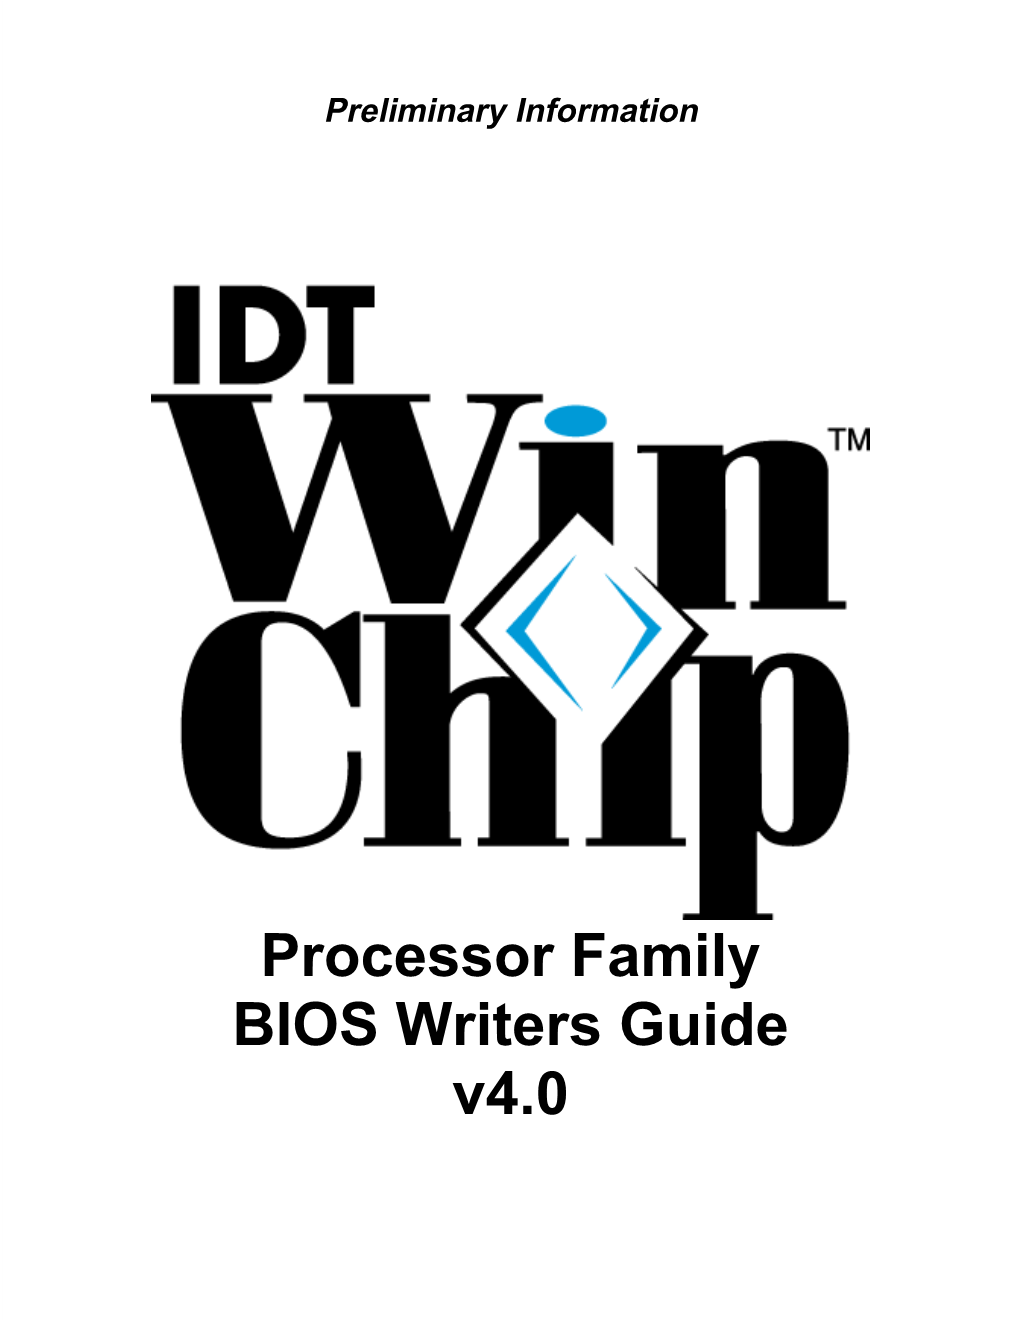 IDT WINCHIP BIOS Writers Guide Preliminary Information This Page Is Unintentionally Left Blank